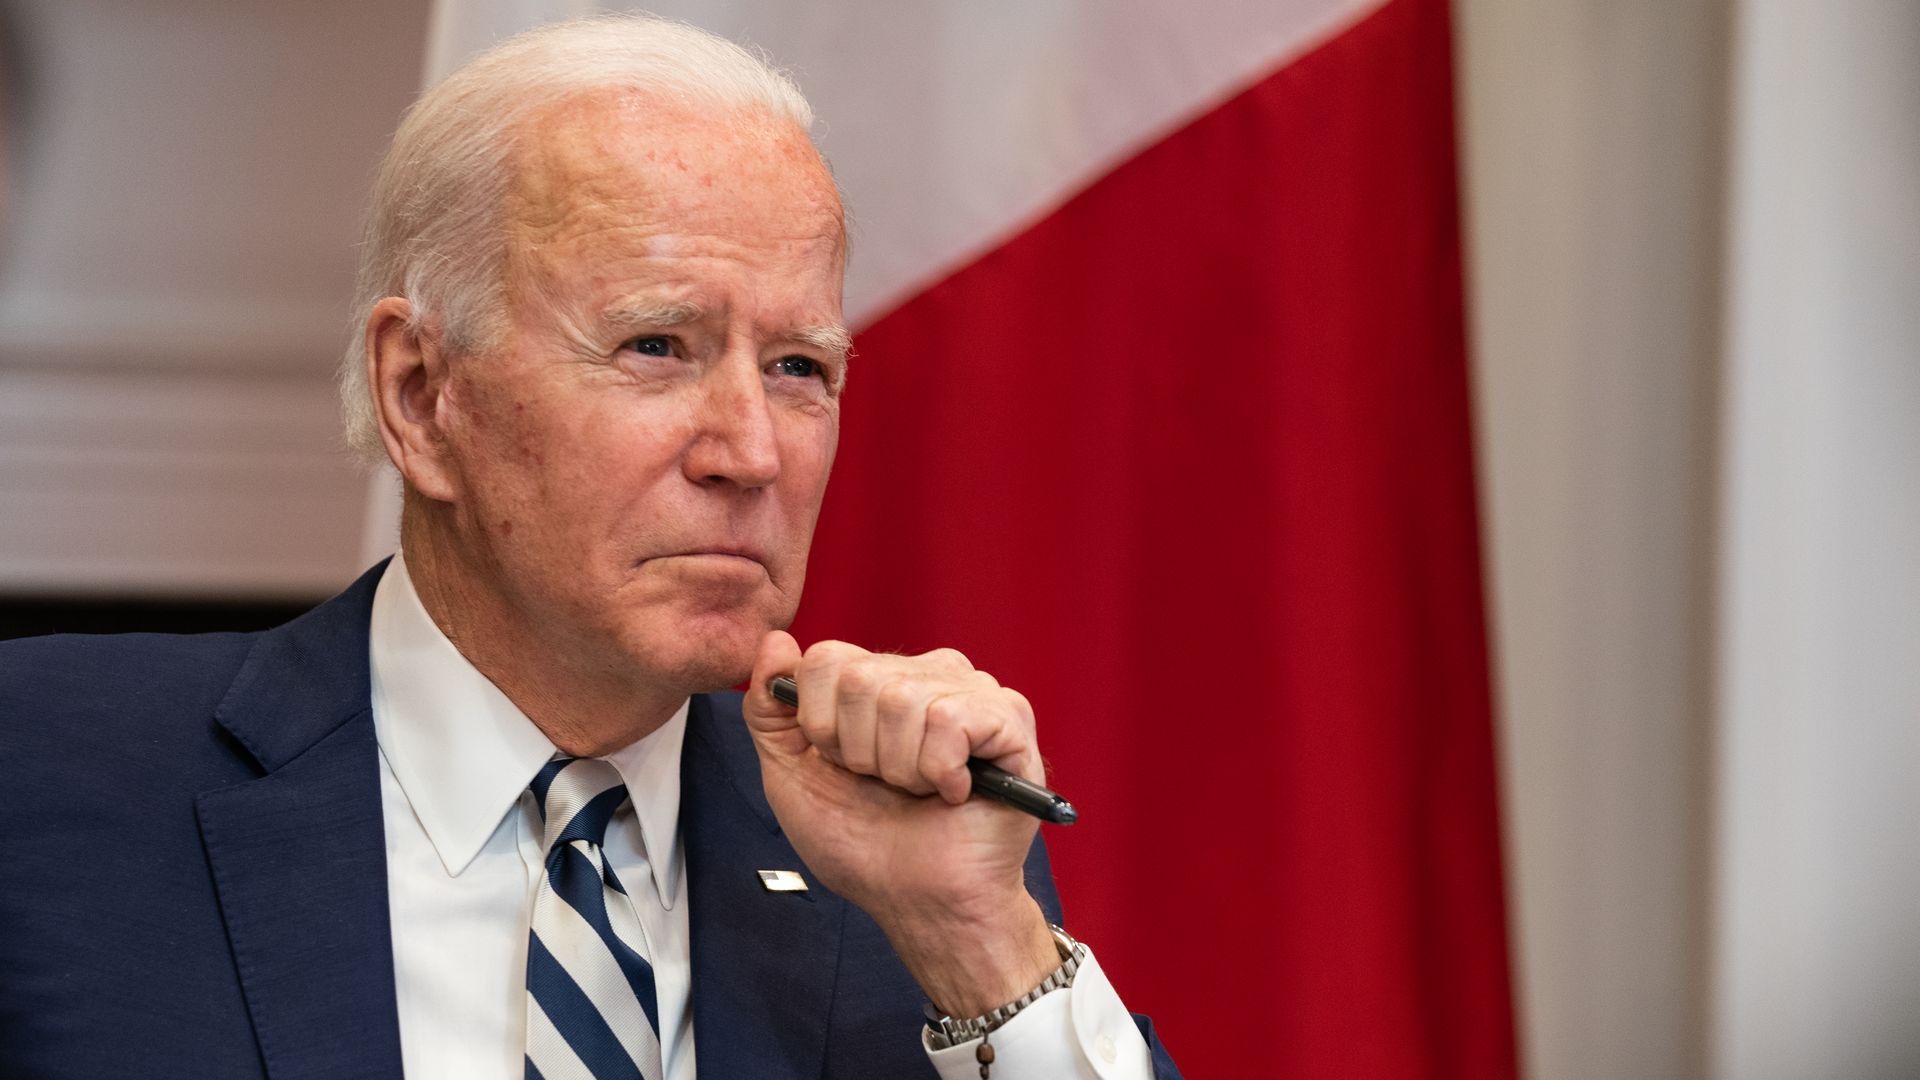 President Joe Biden holding a pen and looking thoughtful